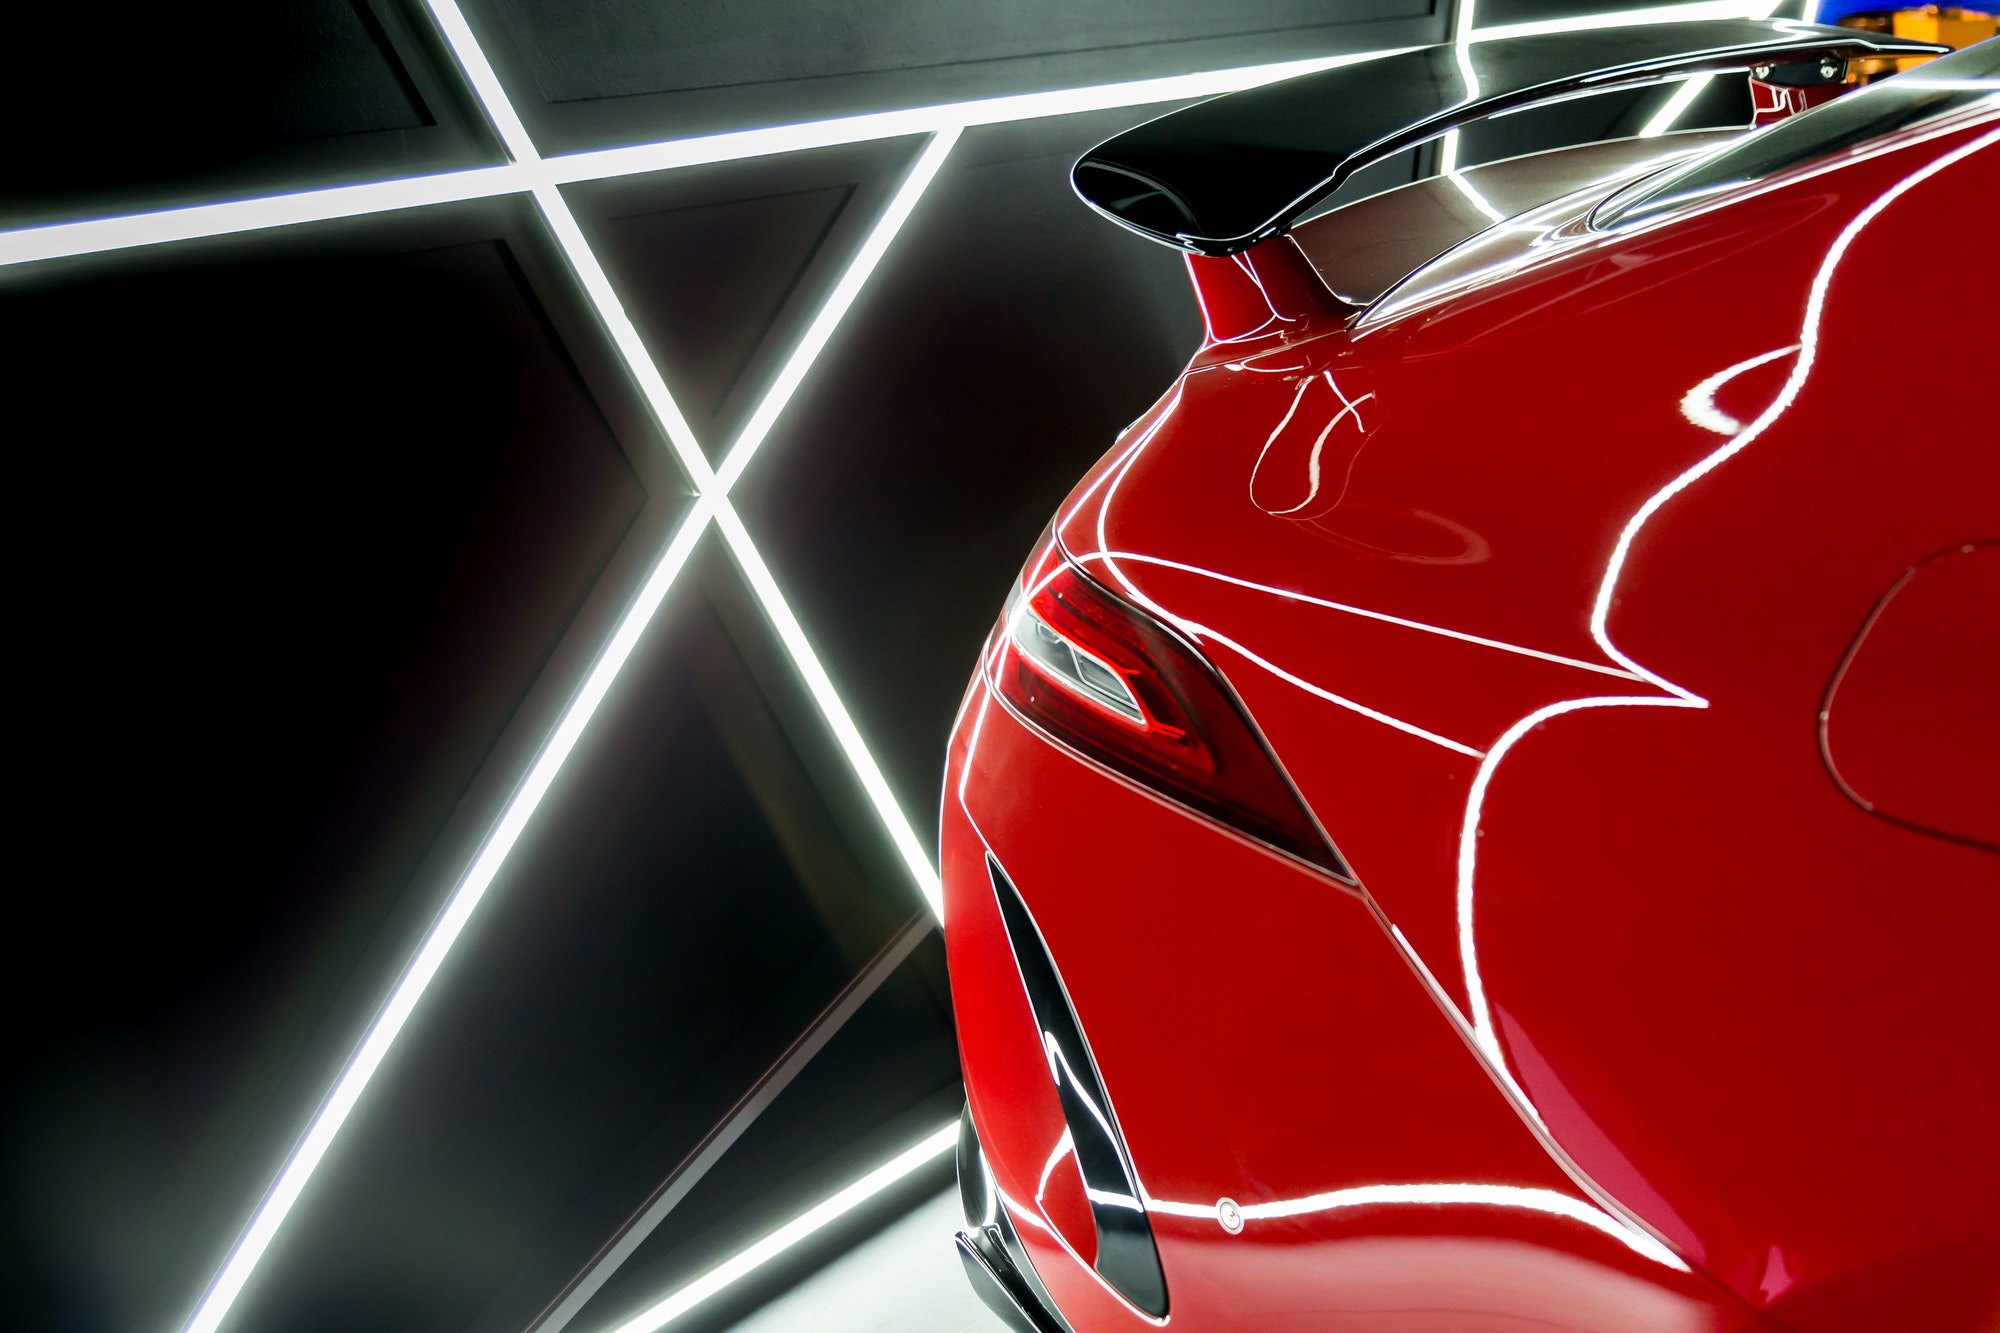 luxury-red-car-closeup-details-with-reflections-of-neon-lights-in-it.jpg